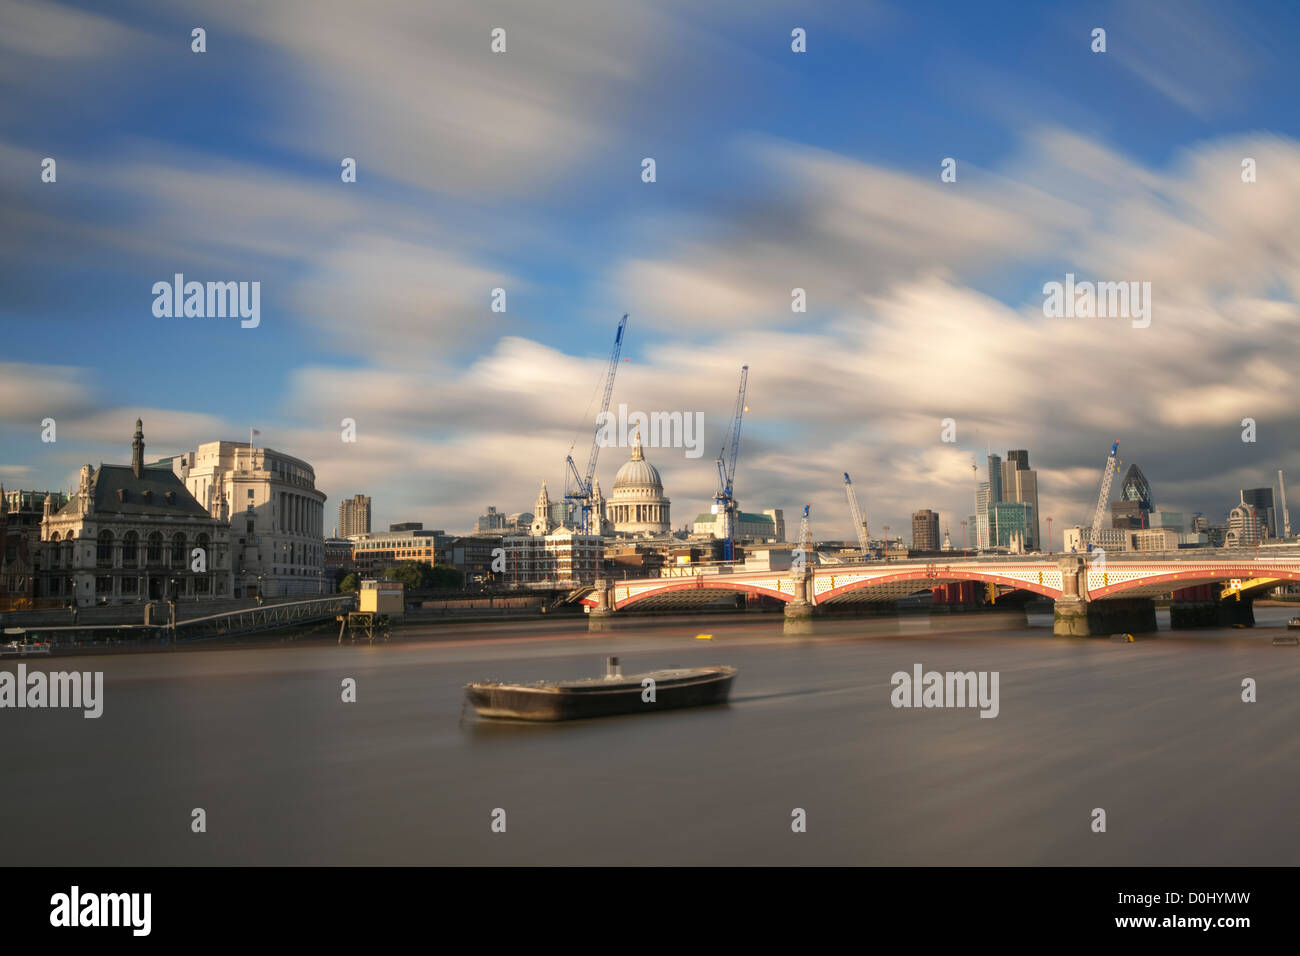 A view of the City of London from the south Embankment. Stock Photo